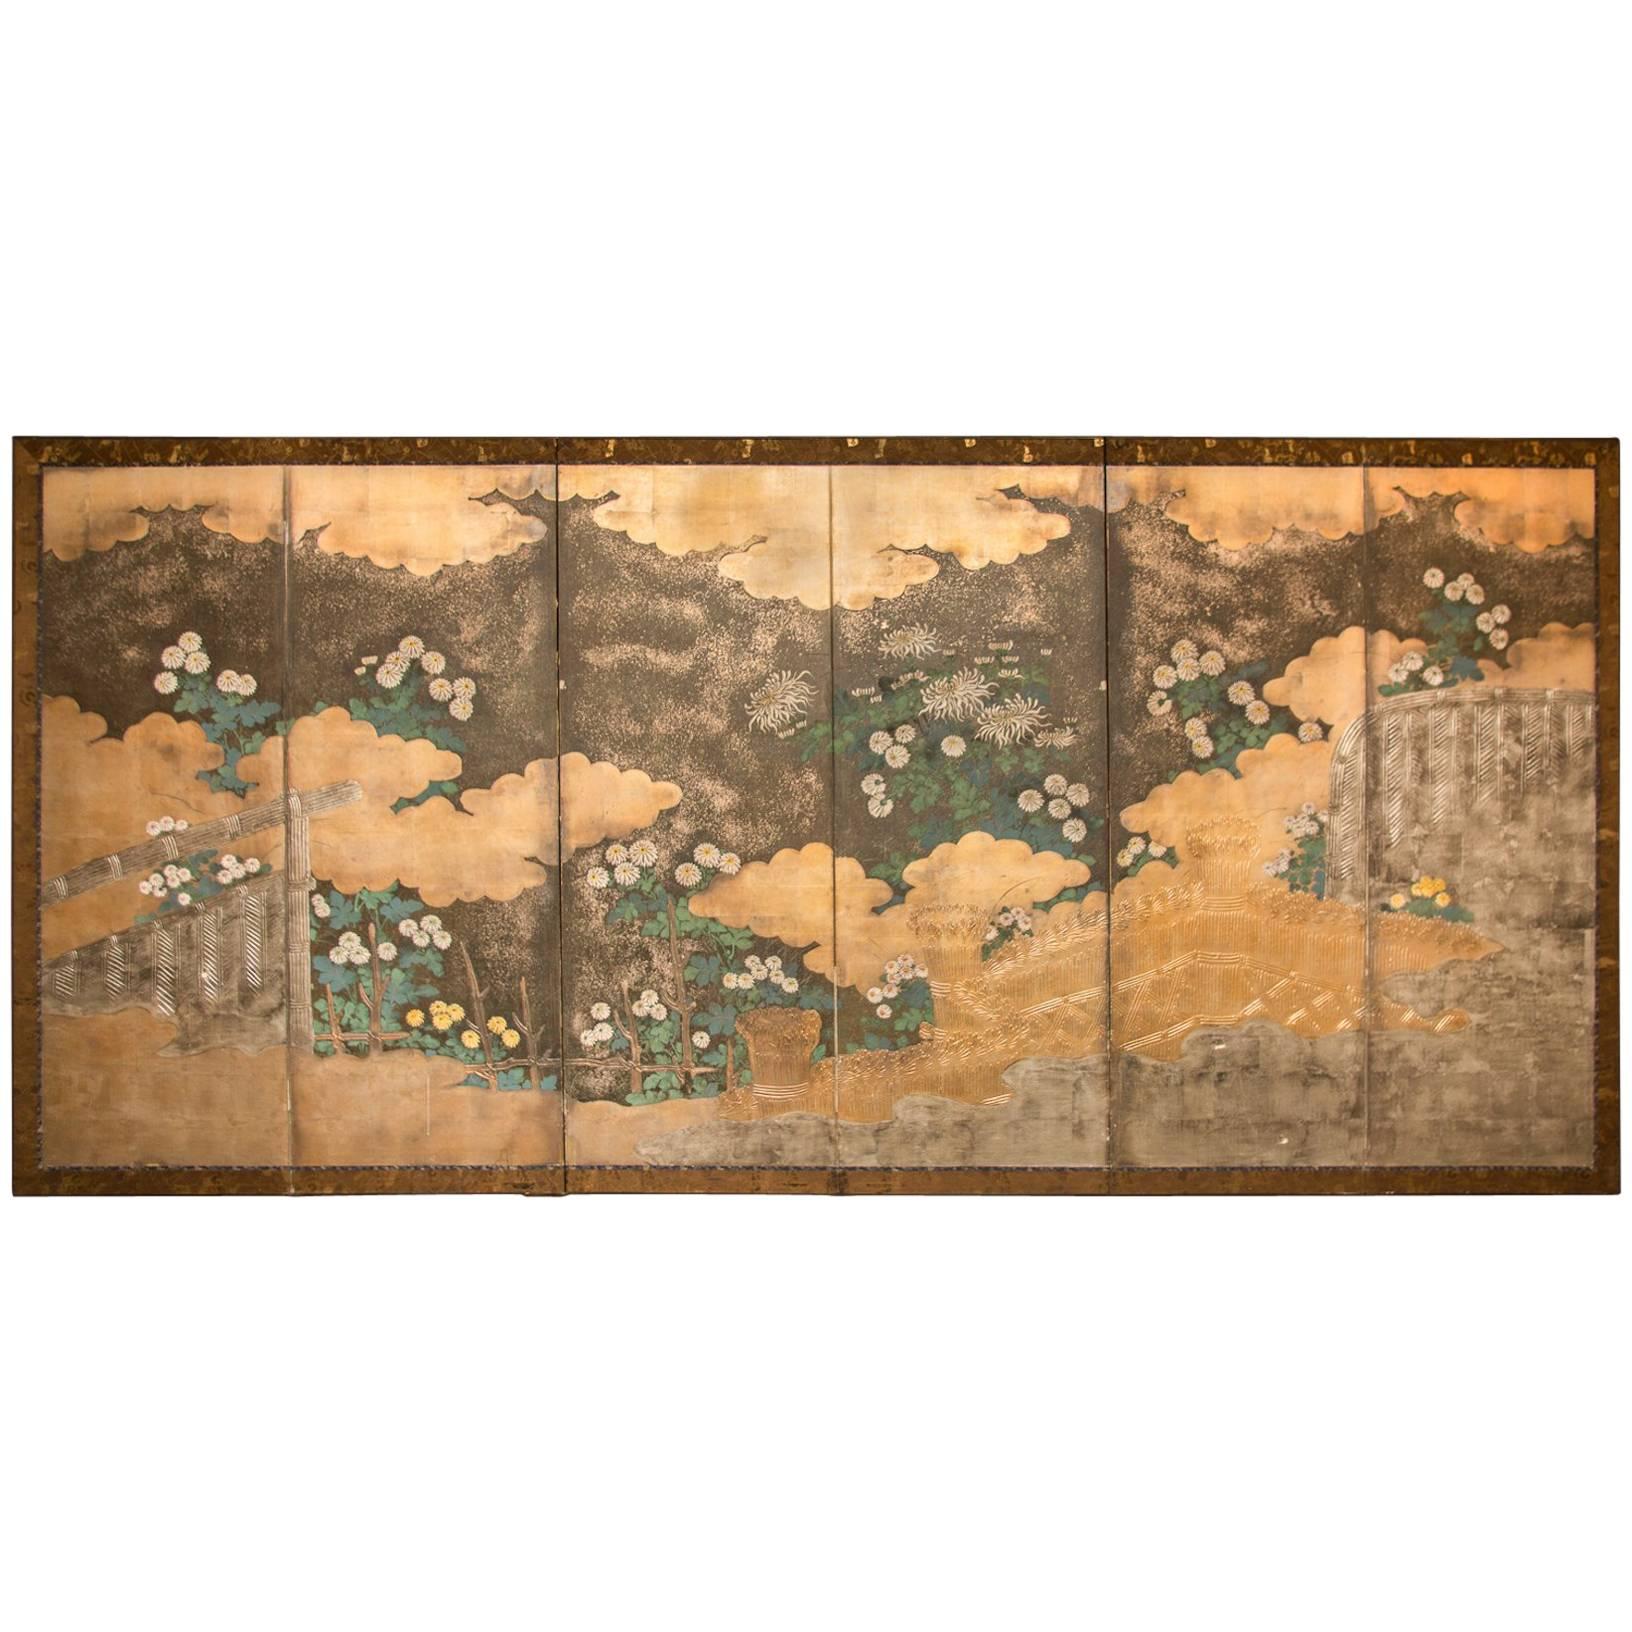 Japanese Six-Panel Screen, “Rimpa School Chrysanthemums on Silver and Gold”